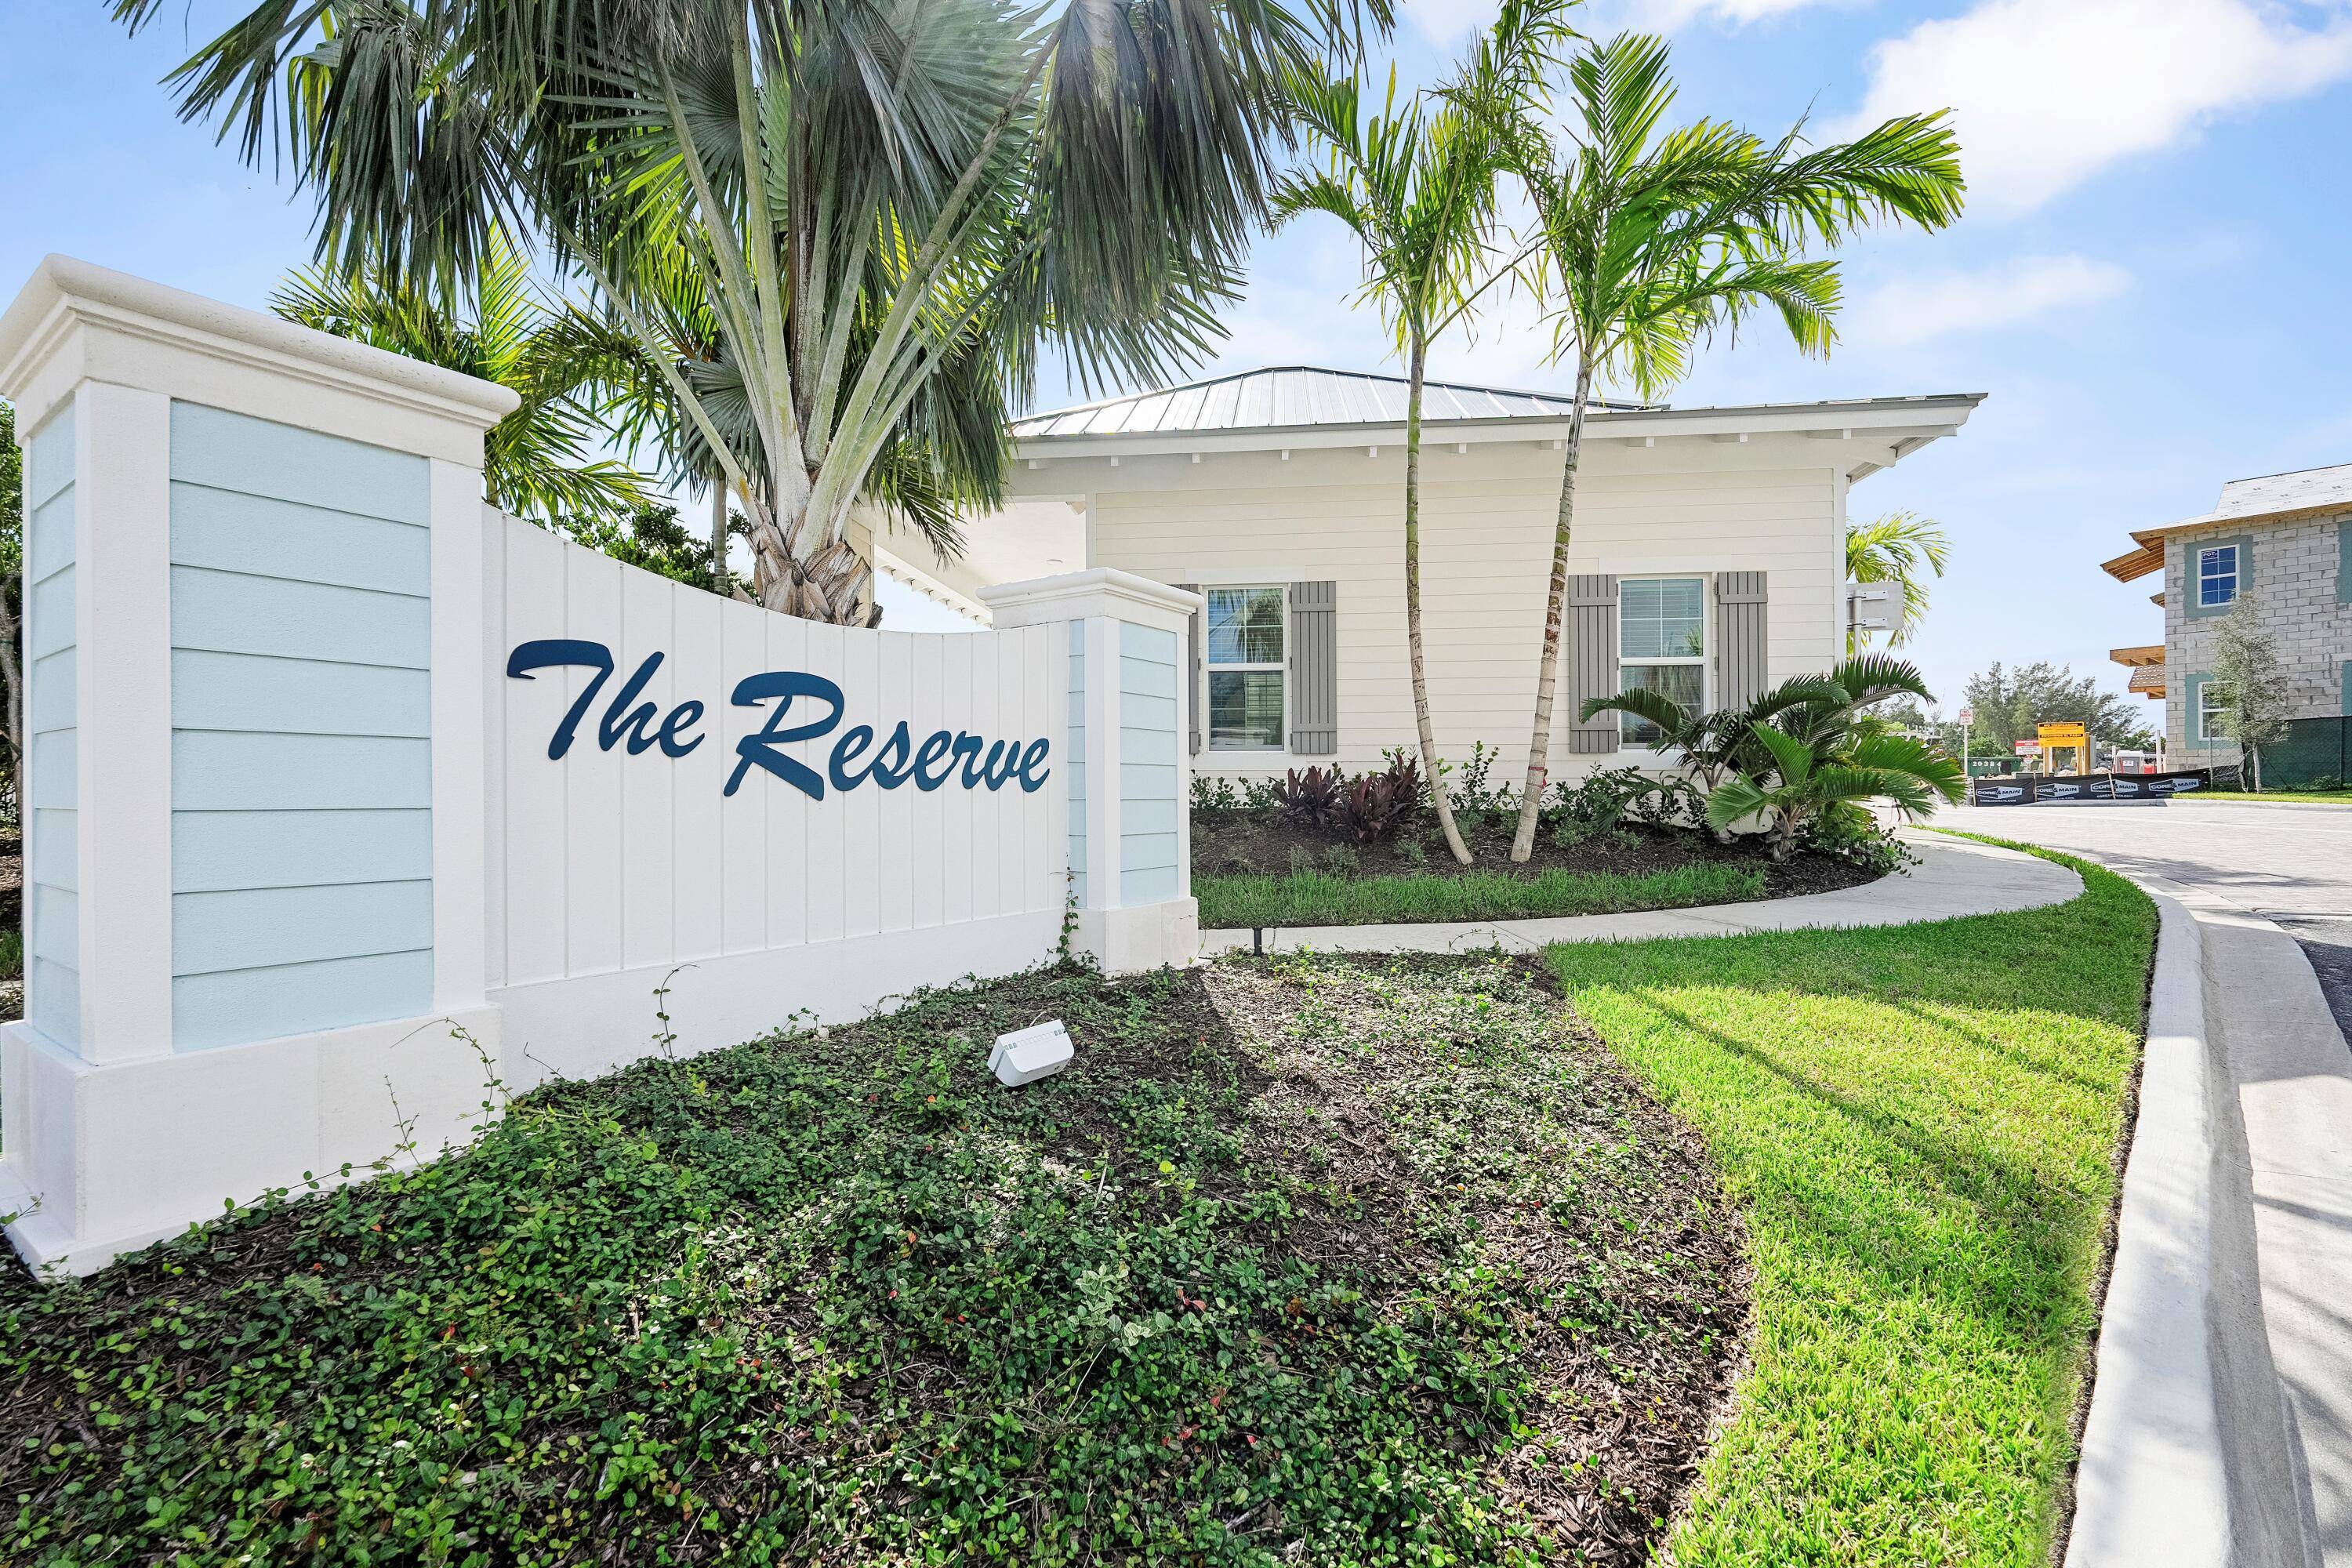 Enjoy coastal living at its finest at The Reserve at Tequesta a new upscale development consisting of only 69 townhomes in the charming Village of Tequesta.